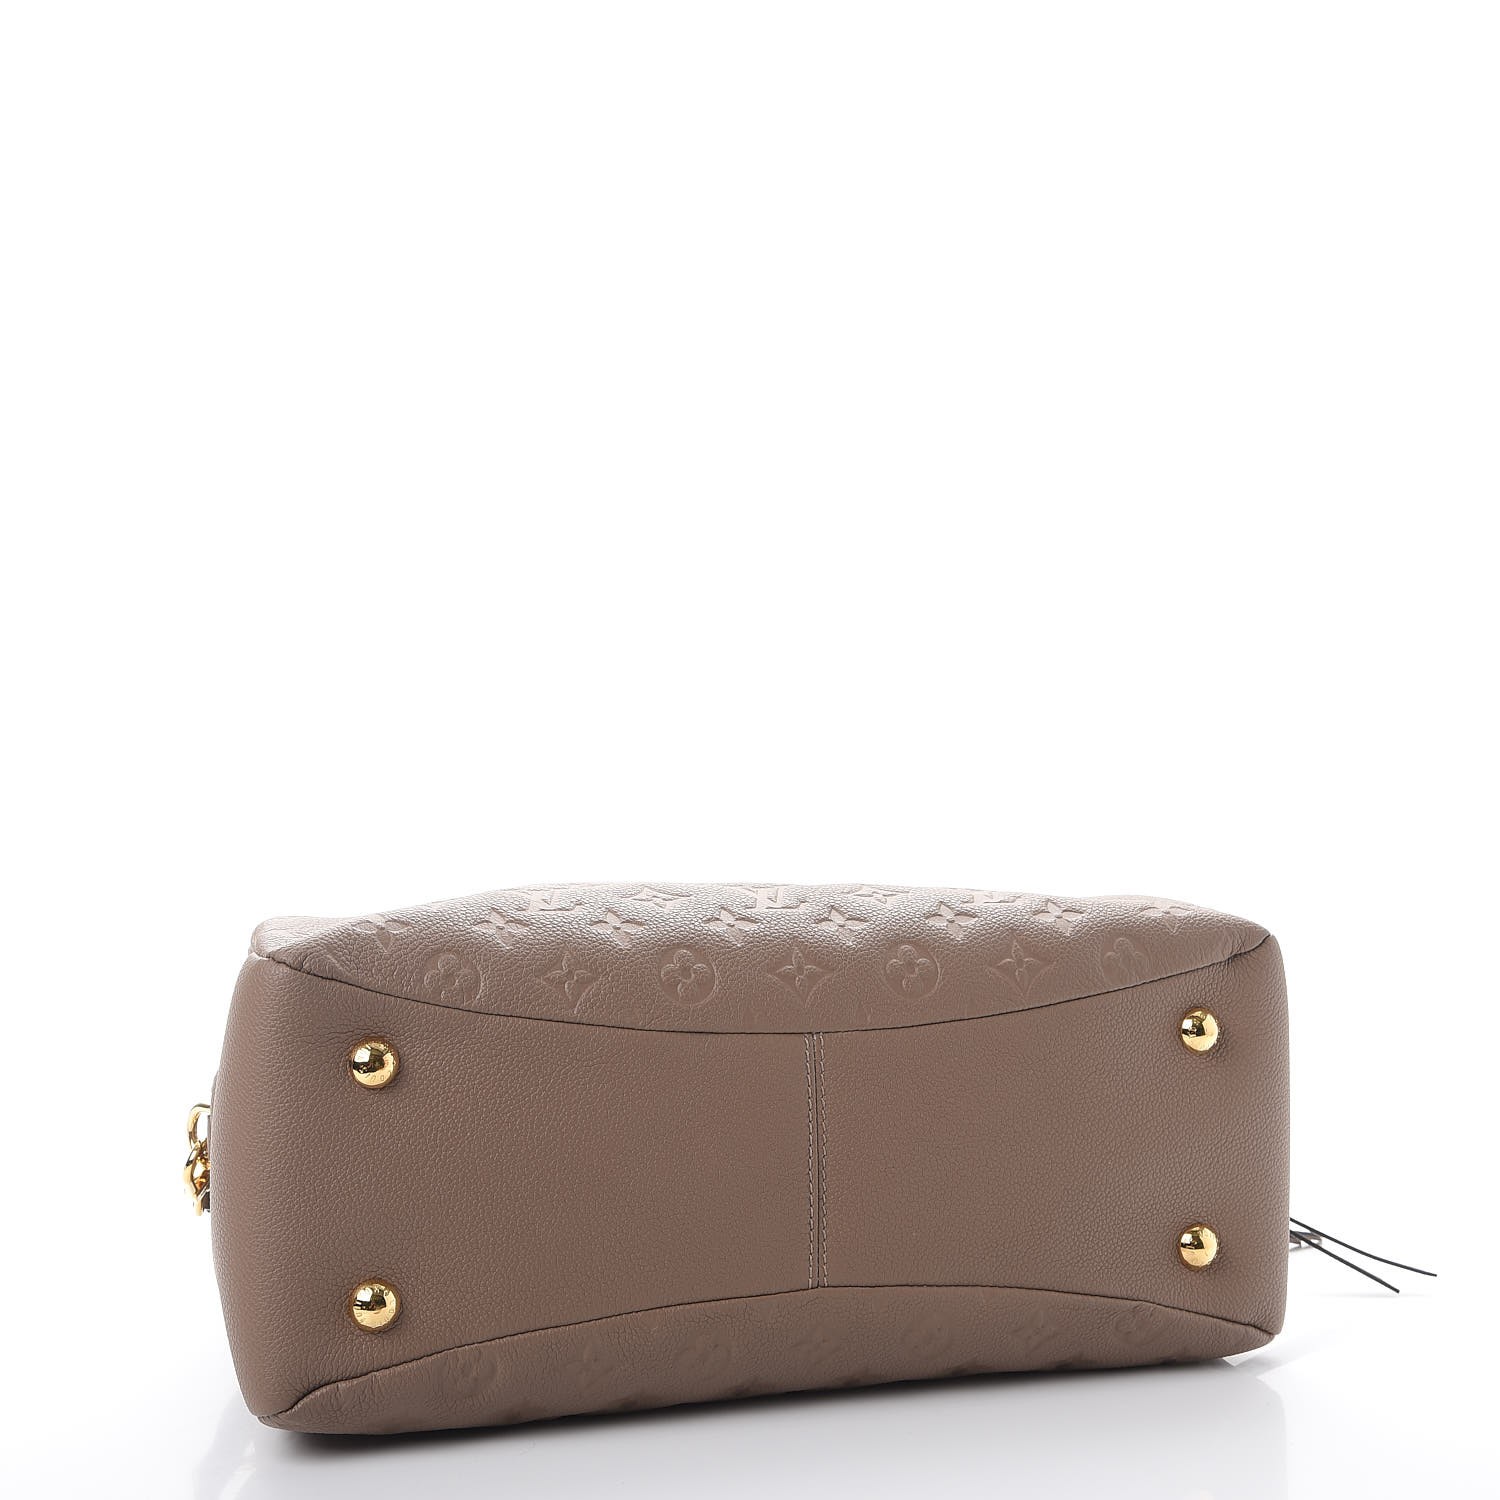 Louis Vuitton Artsy Mm In Taupe Glace